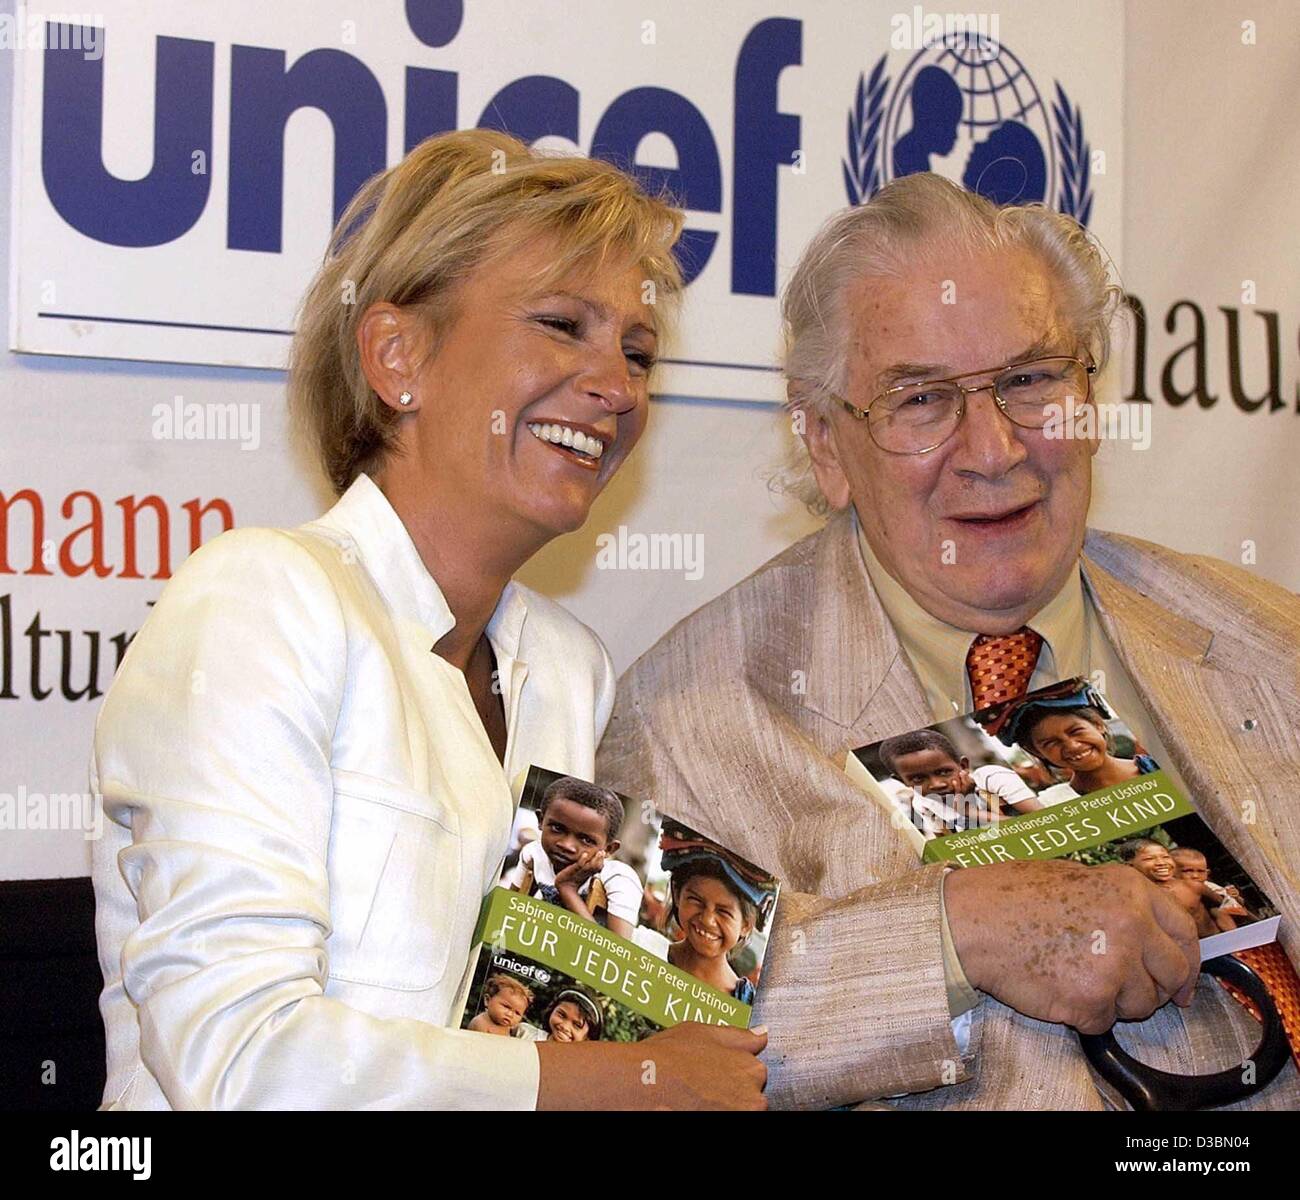 (dpa) - The Unicef ambassadors, German TV host Sabine Christiansen and actor Sir Peter Ustinov, present the book entitled 'Fuer jedes Kind' ('For Every Child') at a presentation held in Berlin, 22 May 2003. They are the editors of the book published for the 50th anniversary of the children's fund or Stock Photo